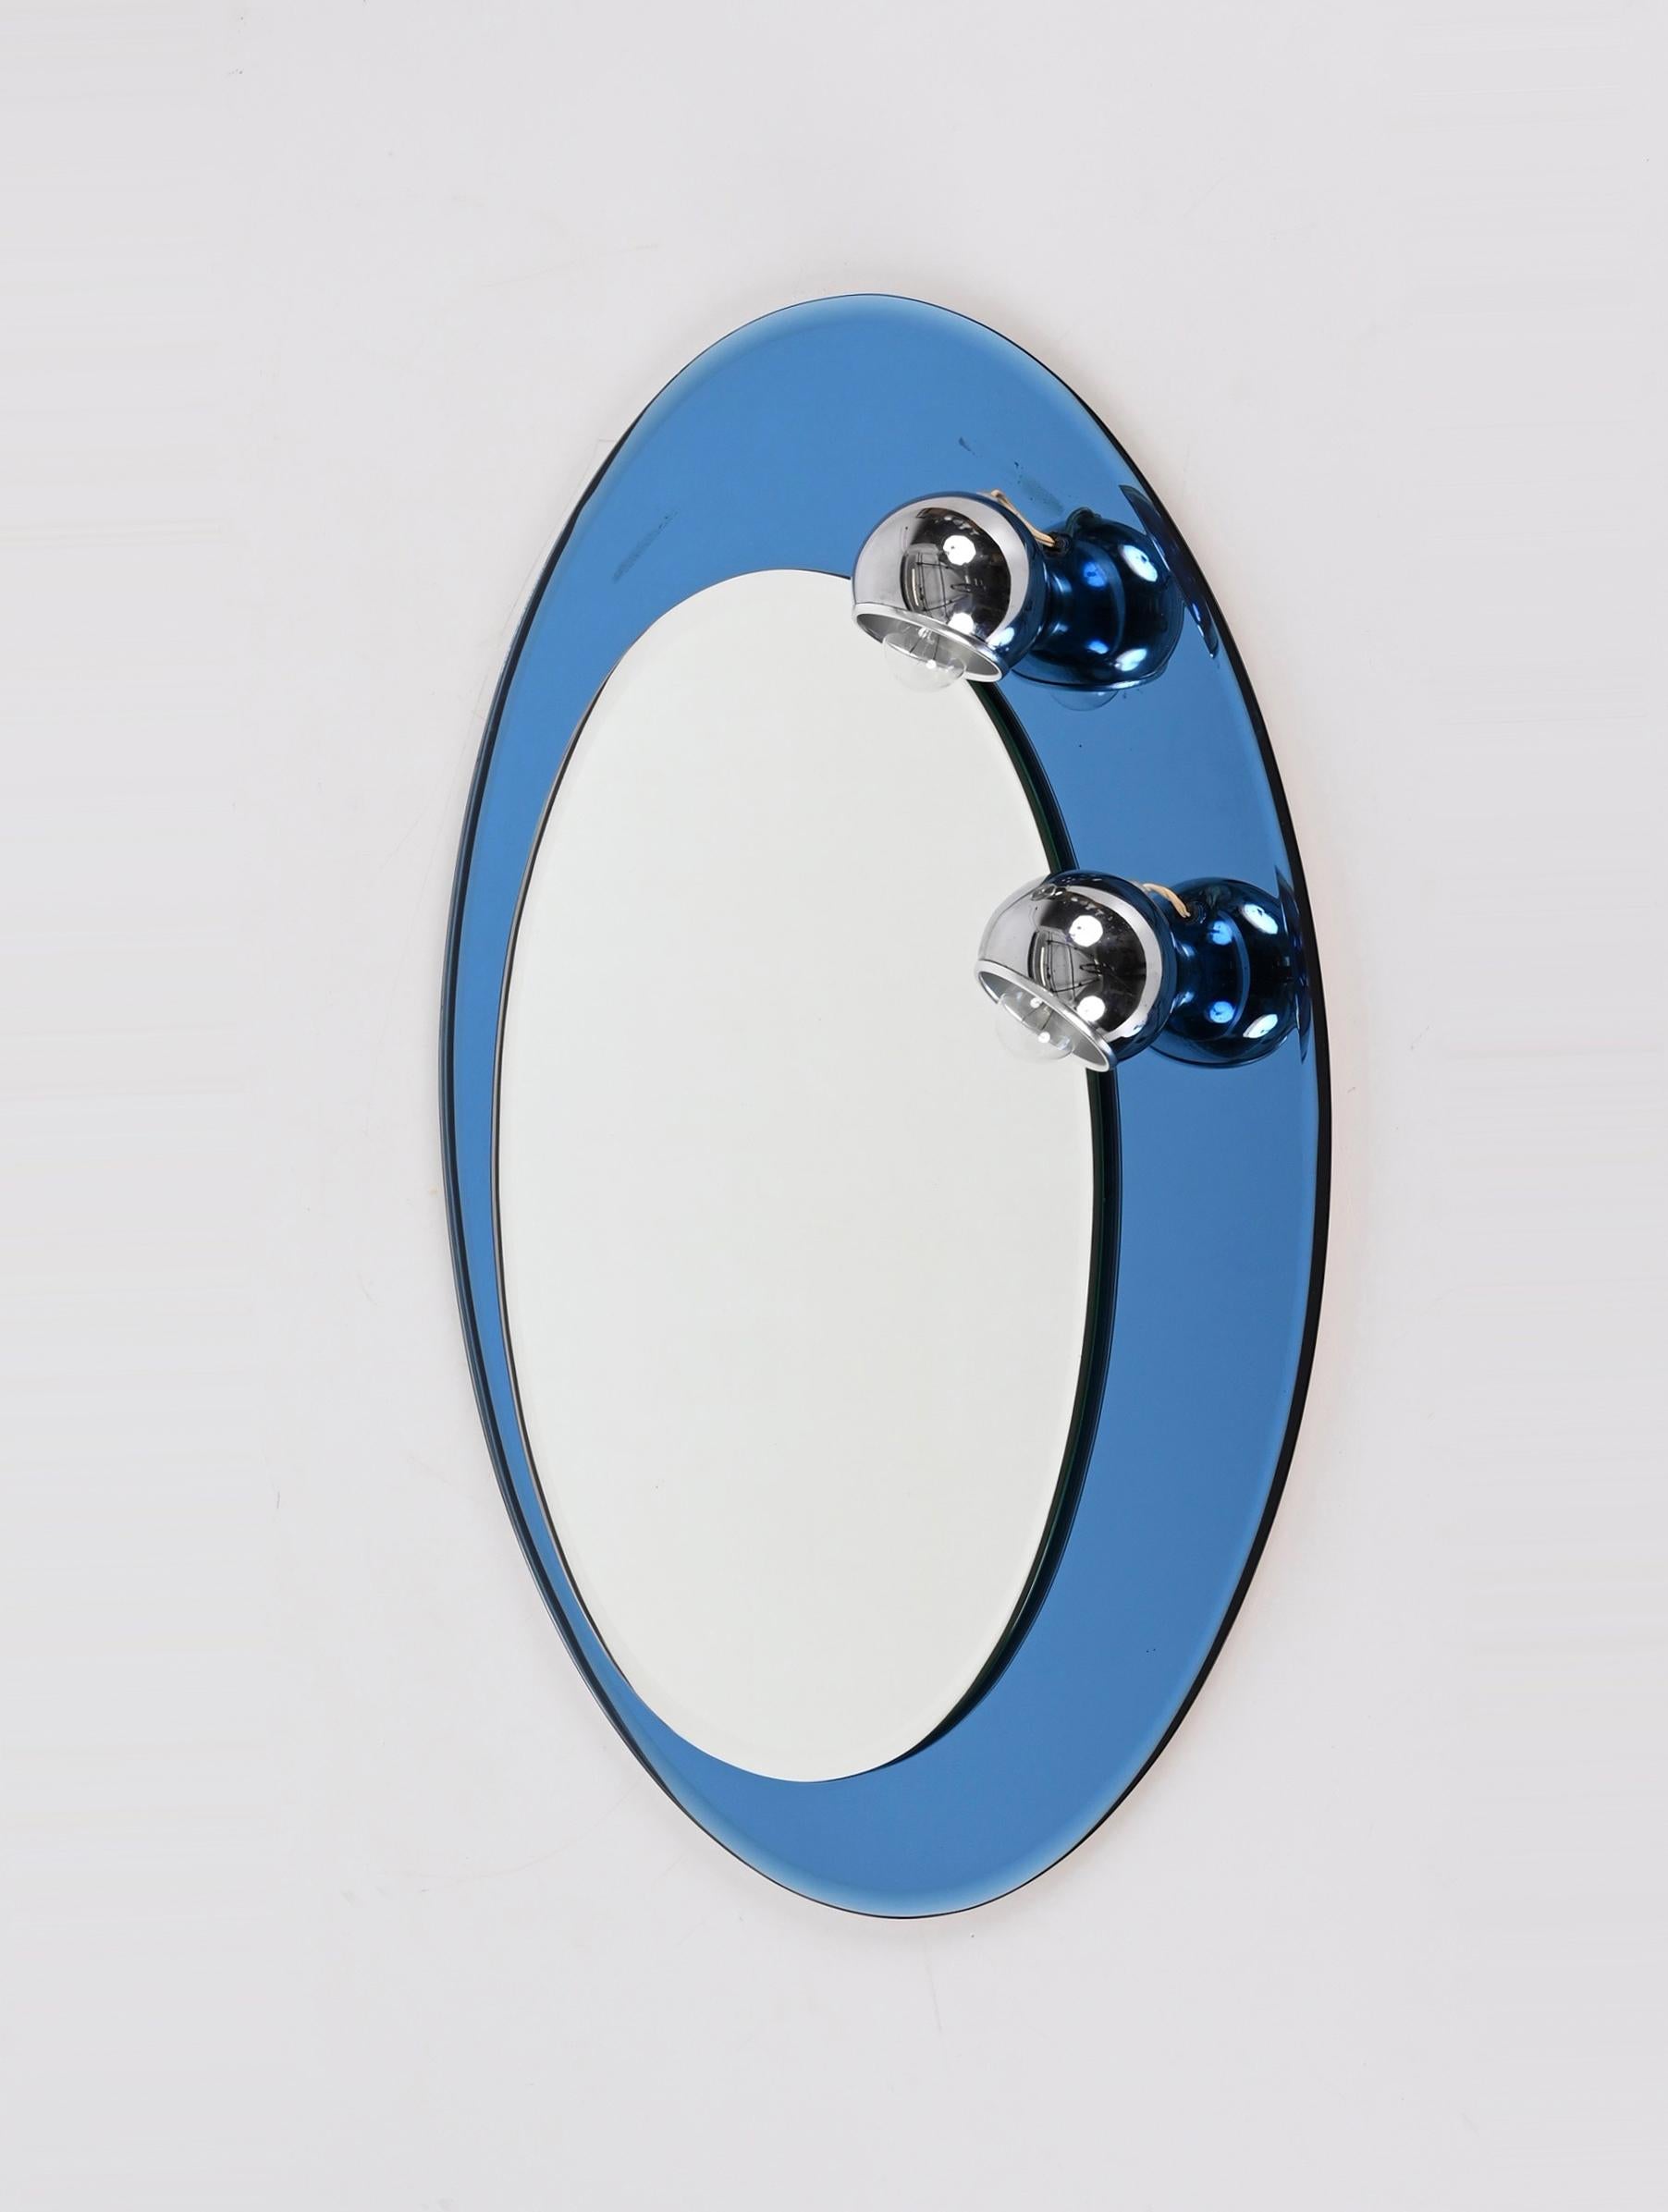 Gorgeous midcentury and very rare oval mirror with a blue frame and magnetic sphere-shaped lights. This fantastic item was produced in Italy during the 1960s in the style of Cristal Arte.

This piece is fantastic because of the wonderful